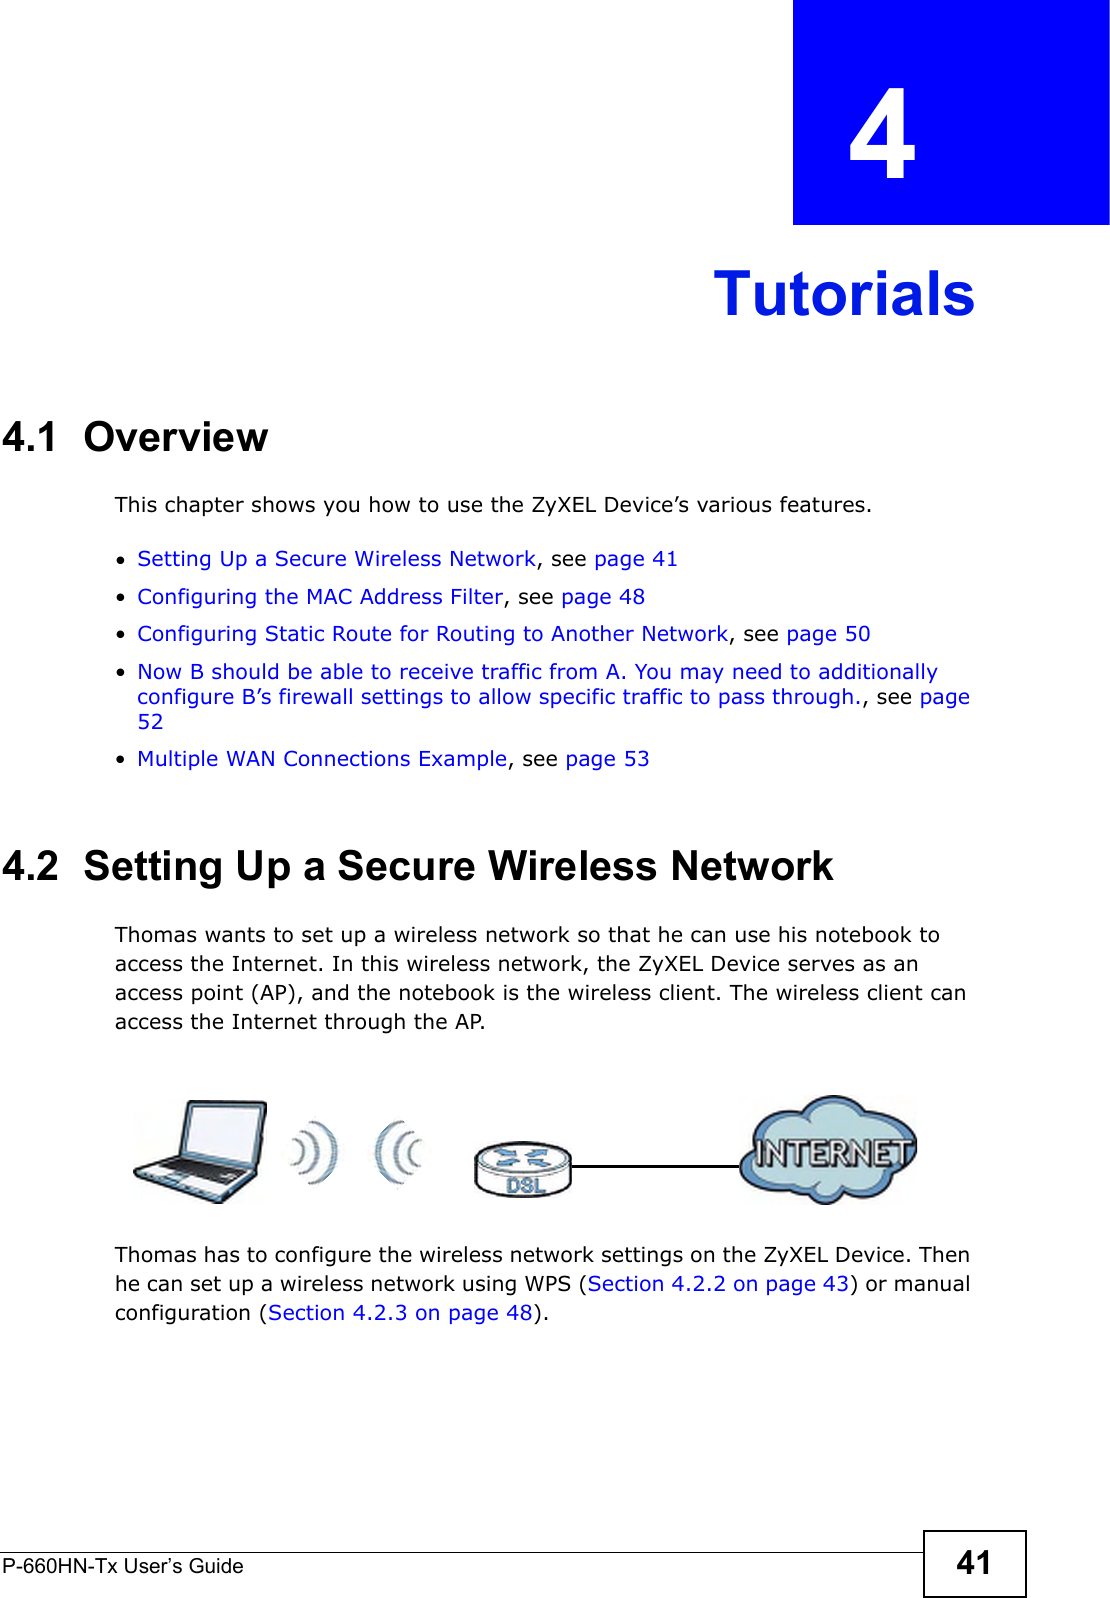 P-660HN-Tx User’s Guide 41CHAPTER  4 Tutorials4.1  OverviewThis chapter shows you how to use the ZyXEL Device’s various features.•Setting Up a Secure Wireless Network, see page 41•Configuring the MAC Address Filter, see page 48•Configuring Static Route for Routing to Another Network, see page 50•Now B should be able to receive traffic from A. You may need to additionally configure B’s firewall settings to allow specific traffic to pass through., see page 52•Multiple WAN Connections Example, see page 534.2  Setting Up a Secure Wireless NetworkThomas wants to set up a wireless network so that he can use his notebook to access the Internet. In this wireless network, the ZyXEL Device serves as an access point (AP), and the notebook is the wireless client. The wireless client can access the Internet through the AP.Thomas has to configure the wireless network settings on the ZyXEL Device. Then he can set up a wireless network using WPS (Section 4.2.2 on page 43) or manual configuration (Section 4.2.3 on page 48).